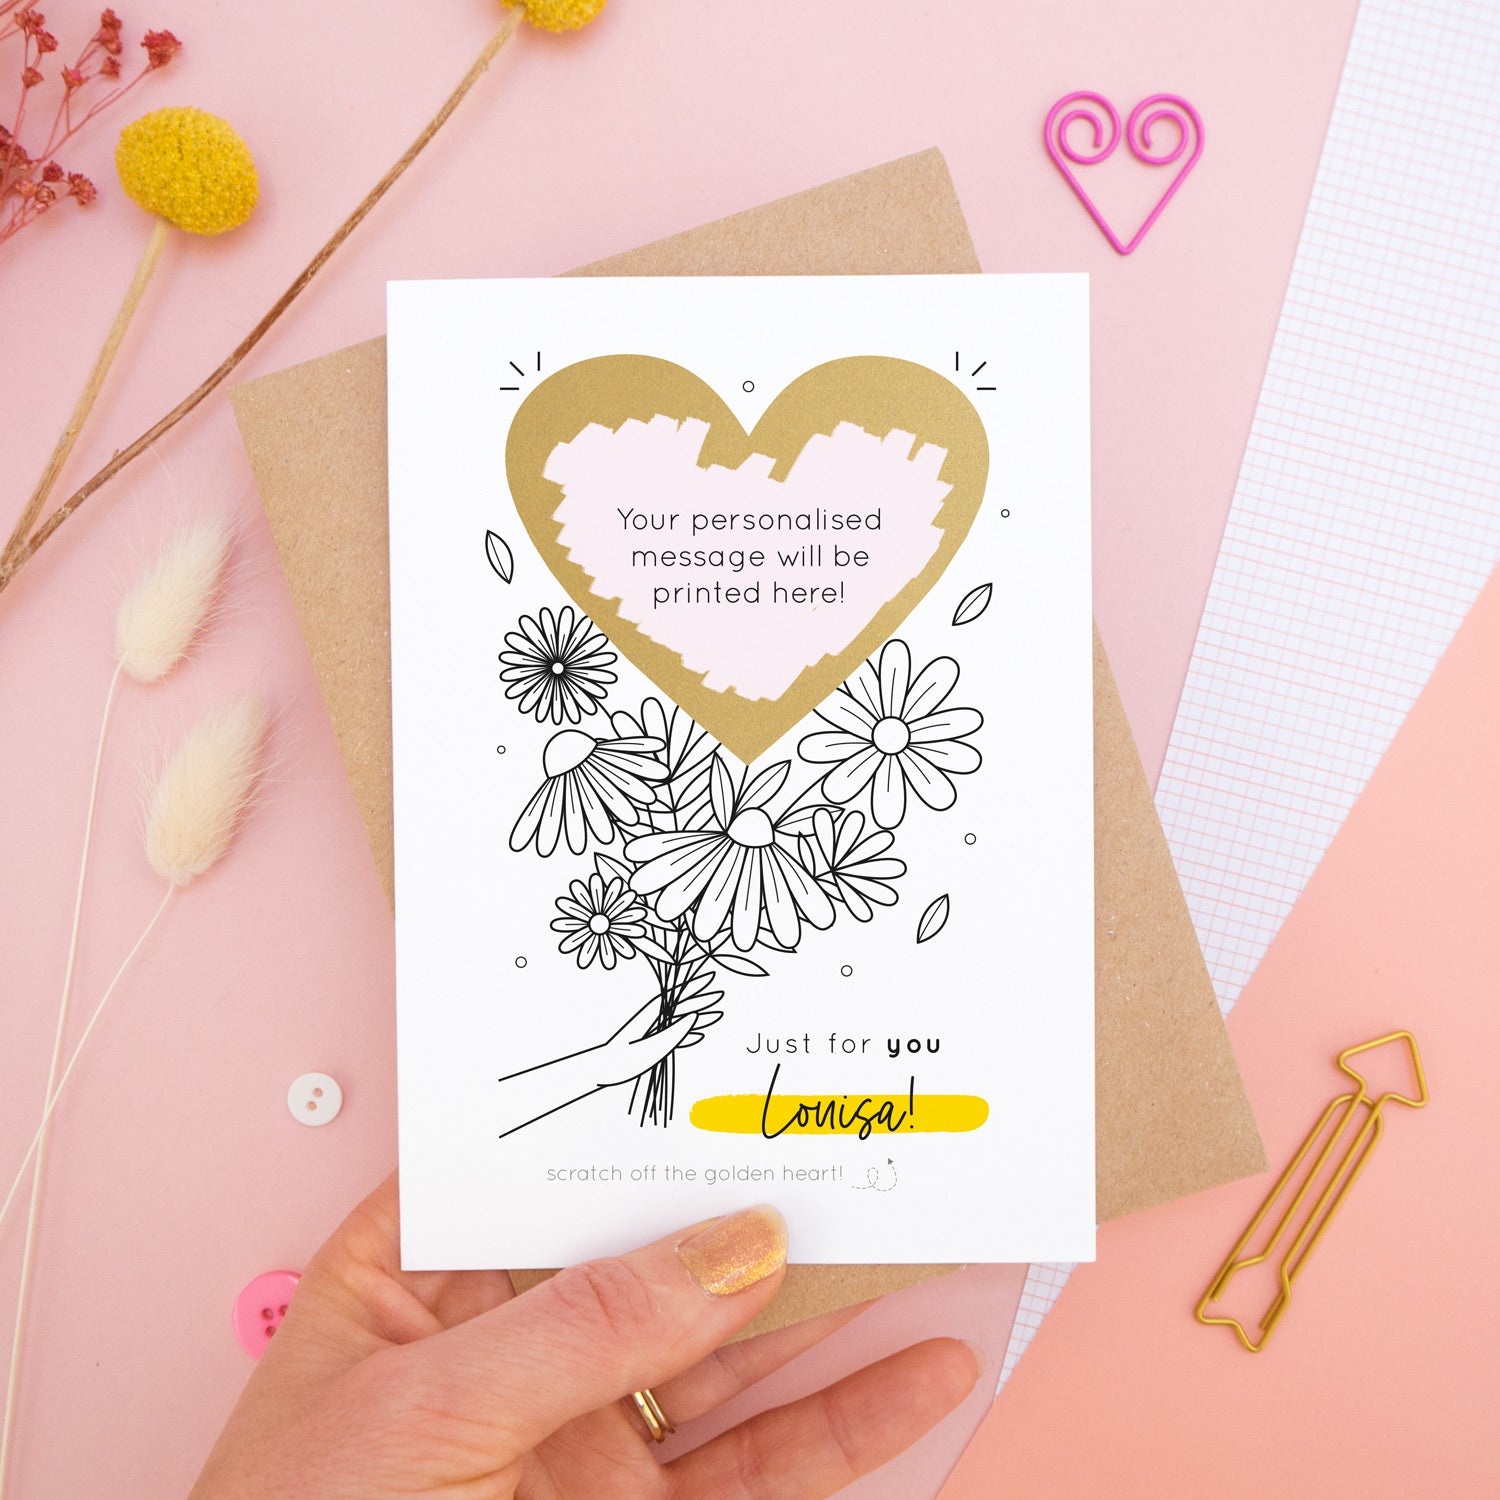 A personalised flower bouquet scratch card photographed on a pink background with floral props, paper clips, and buttons. This card shows a black and white floral illustration and the golden heart after it has been scratched off to reveal the secret message!